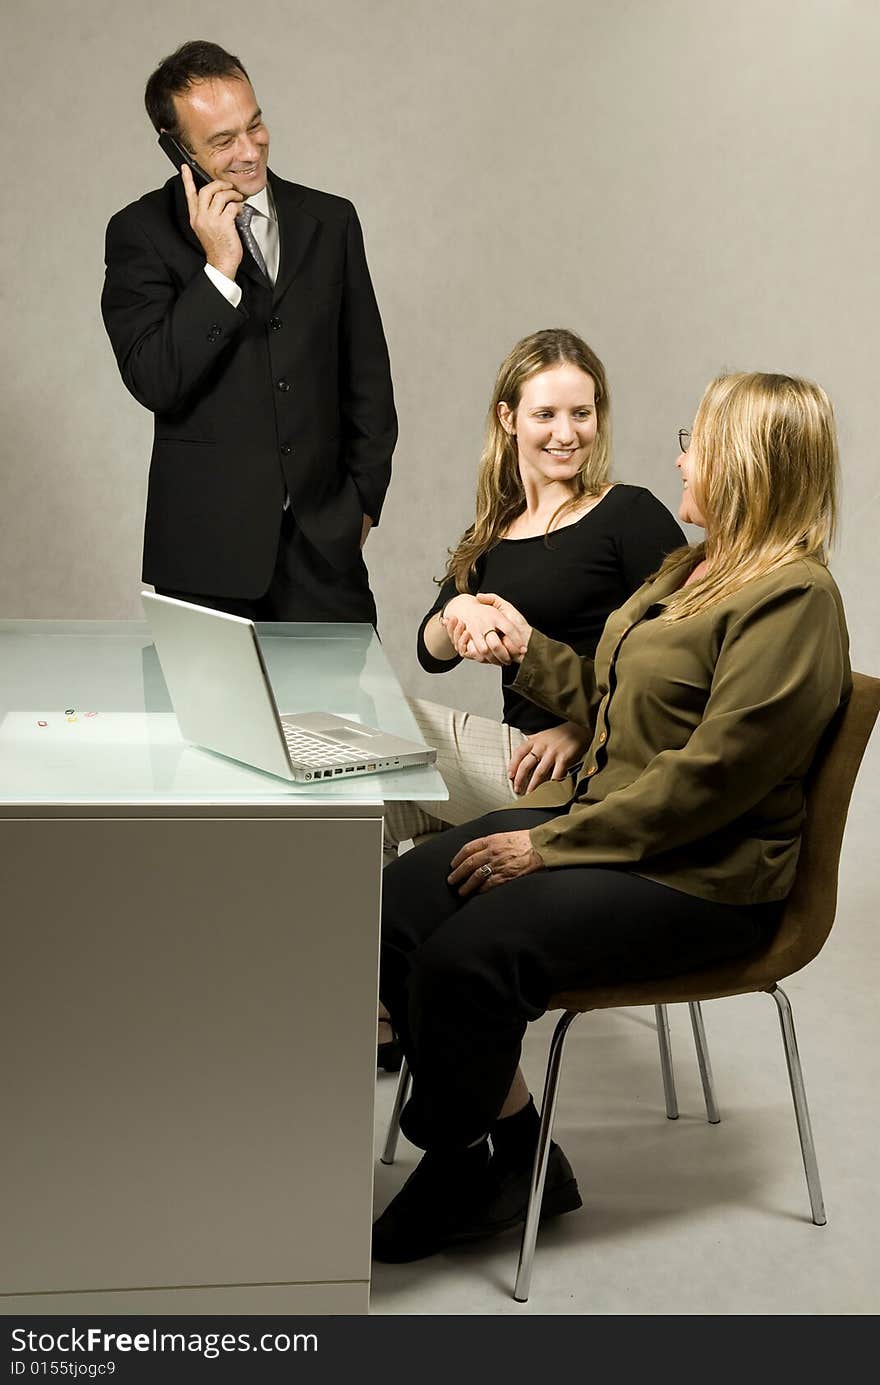 Two women at a desk in front of a laptop shaking hands and smiling, while a man stands on his cell phone smiling. Vertically framed photo. Two women at a desk in front of a laptop shaking hands and smiling, while a man stands on his cell phone smiling. Vertically framed photo.